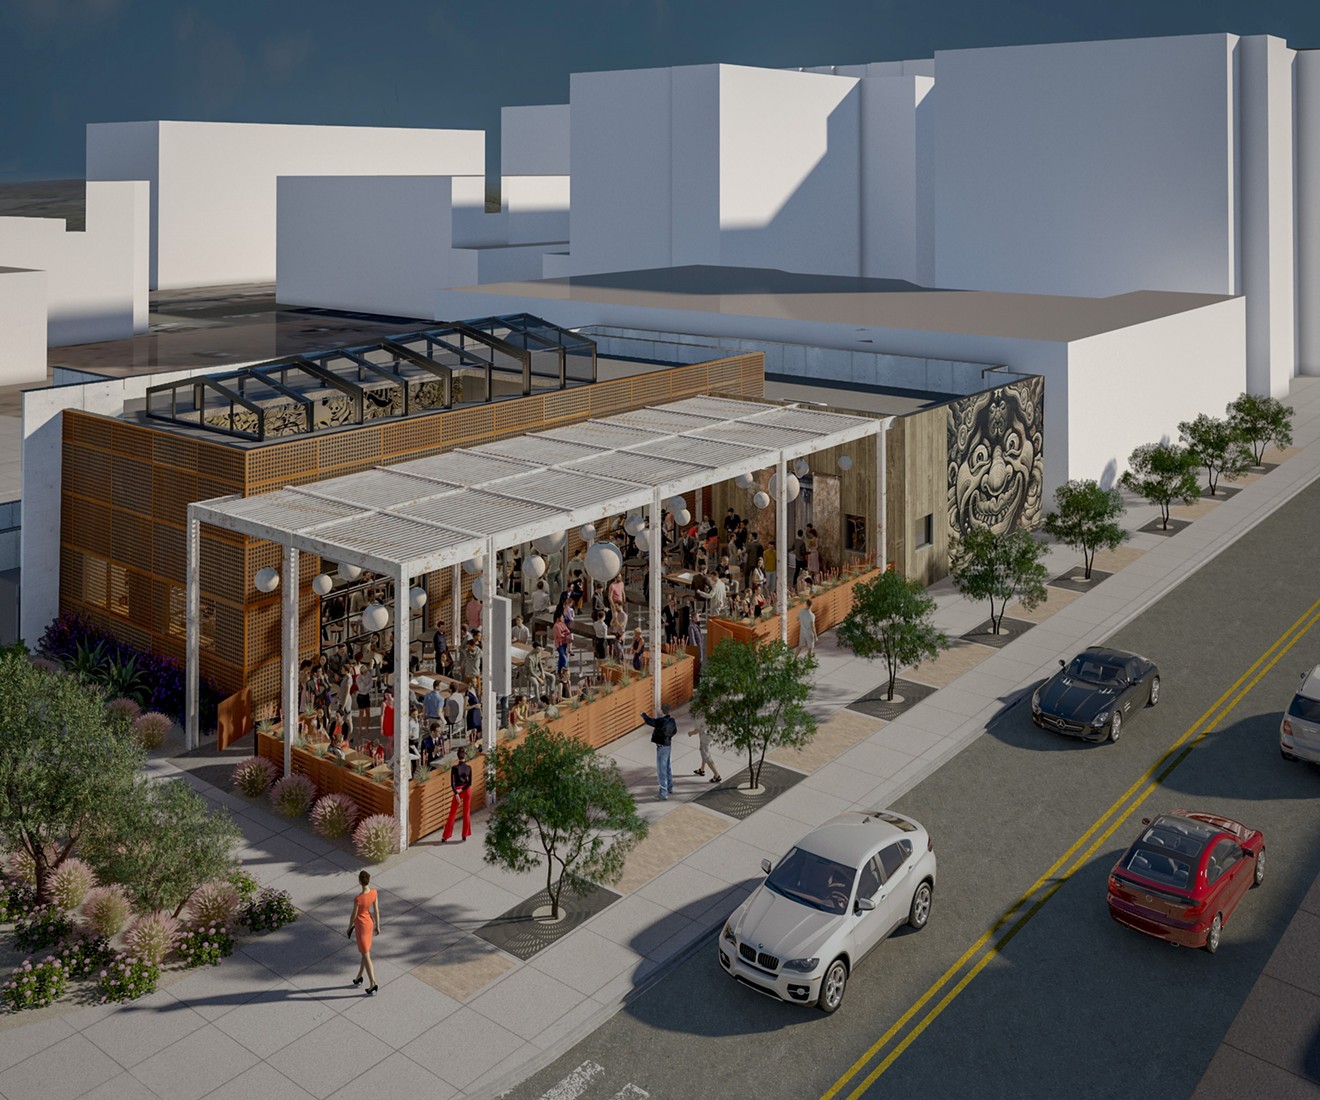 A rendering of the proposed bar and restaurant on the northeast corner of Second and Roosevelt streets.